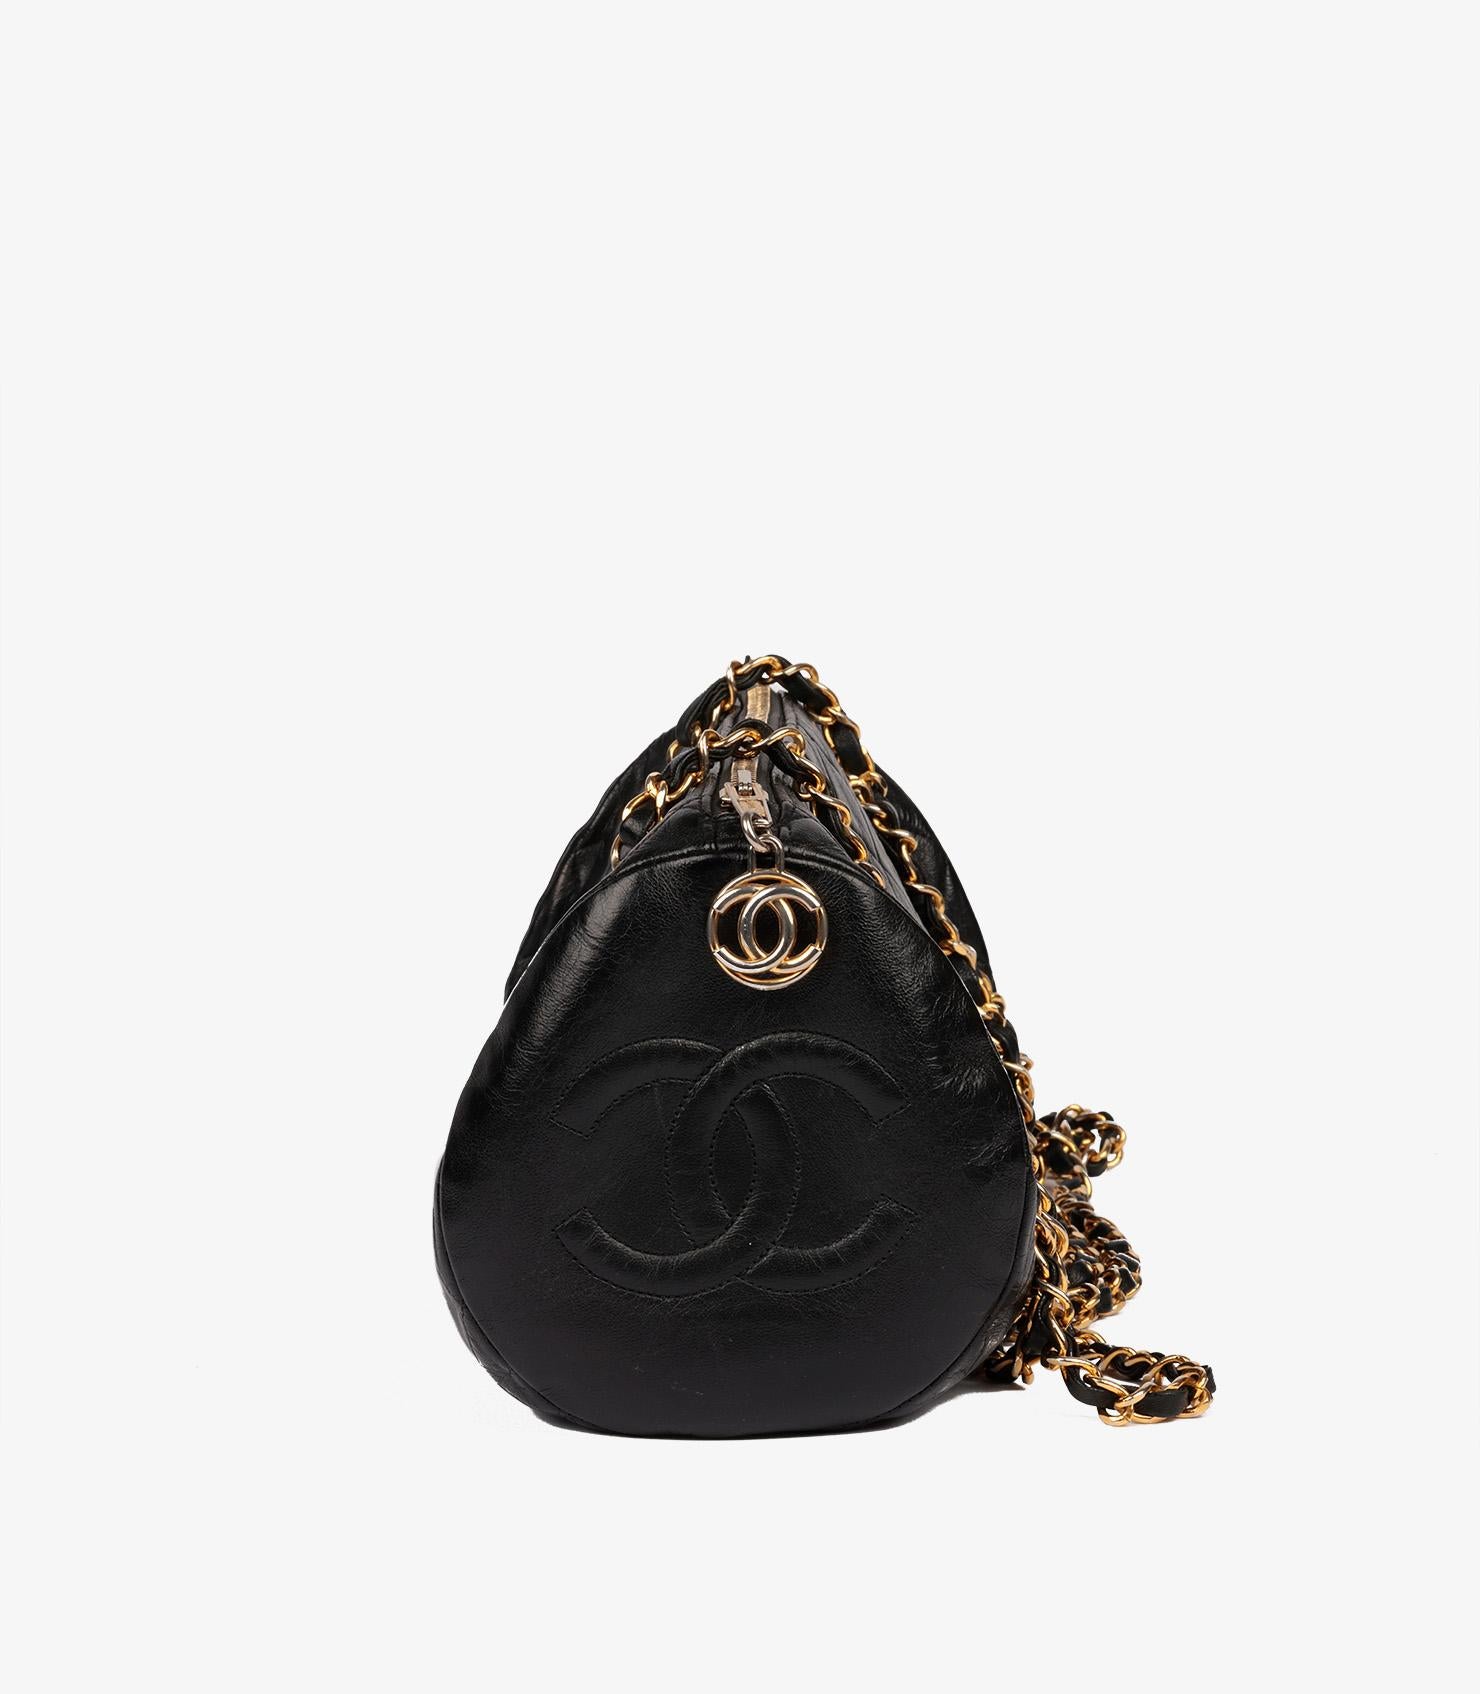 Women's Chanel Black Quilted Lambskin Vintage Bowling Bag